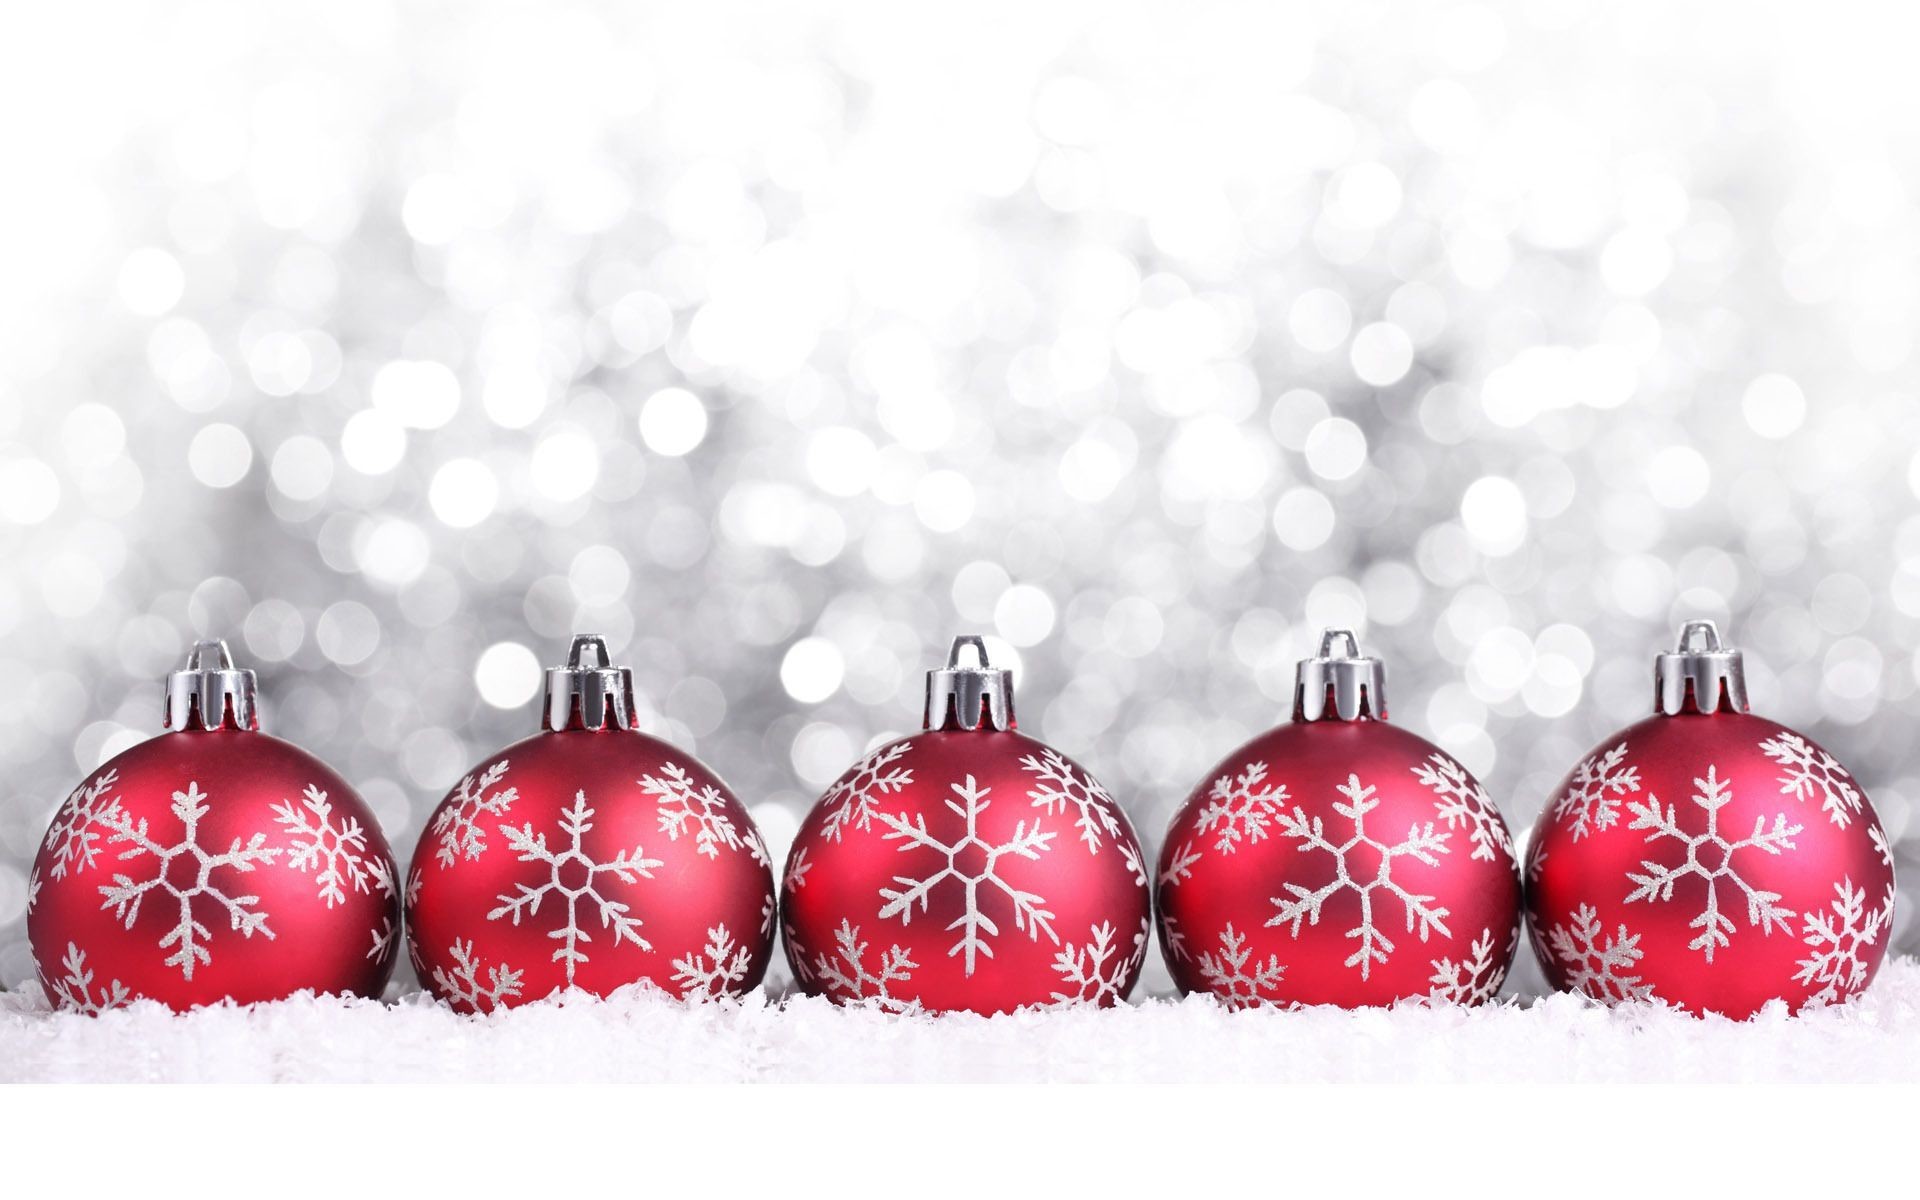 1920x1200 Red Christmas Ornaments Wallpaper.